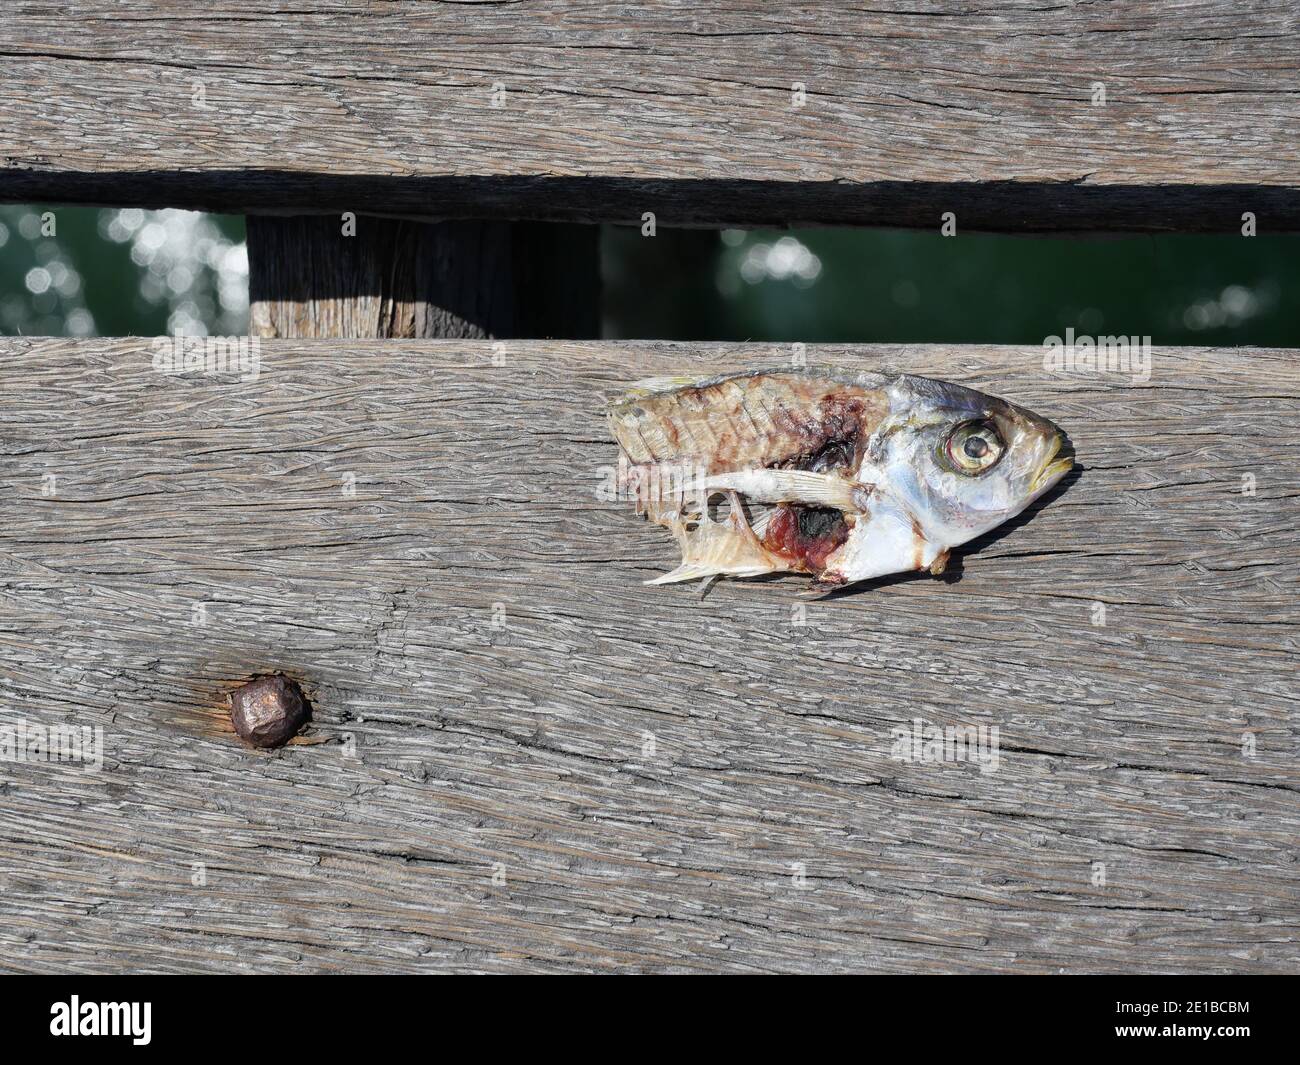 Head and torn body of fish carcass on brown plank with green color water in background Stock Photo